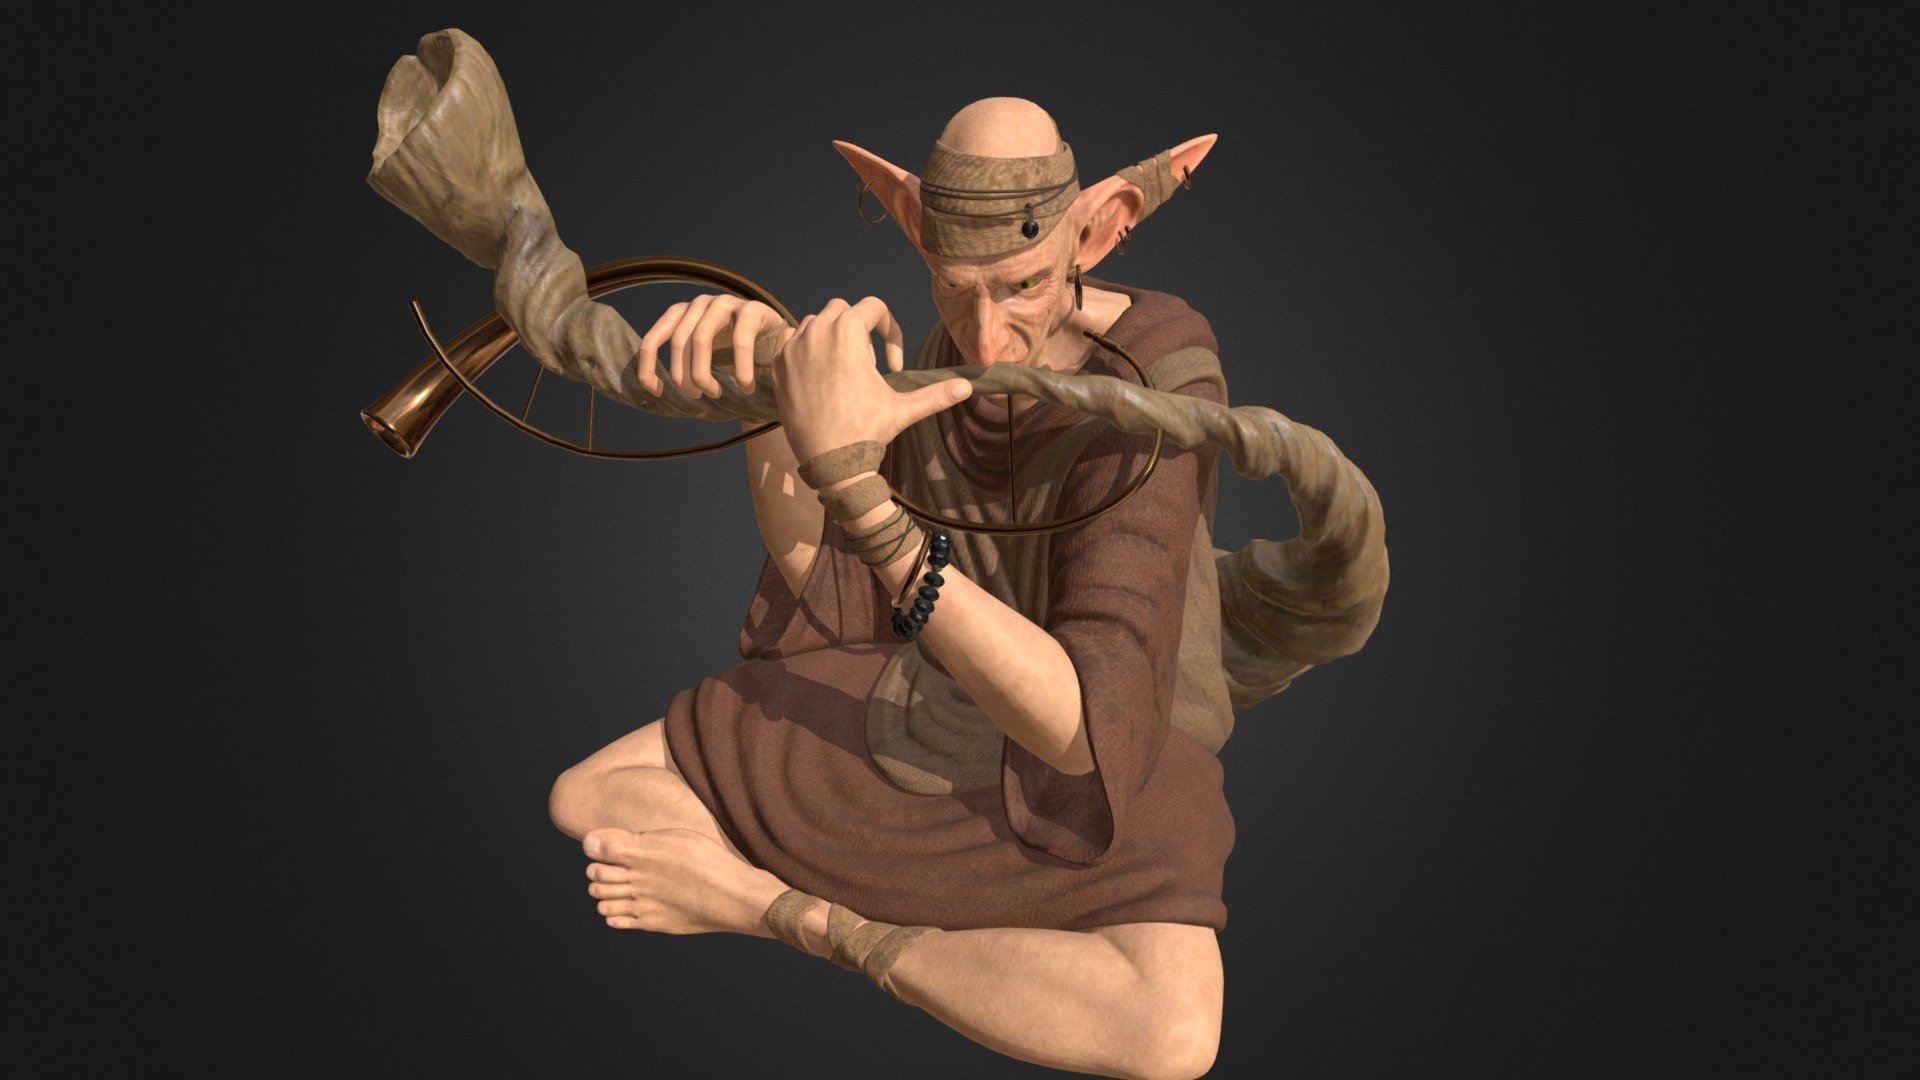 Fantasy Character - Goblin playing fantasy instrument. 
Inspired by the novel &ldquo;War of flower